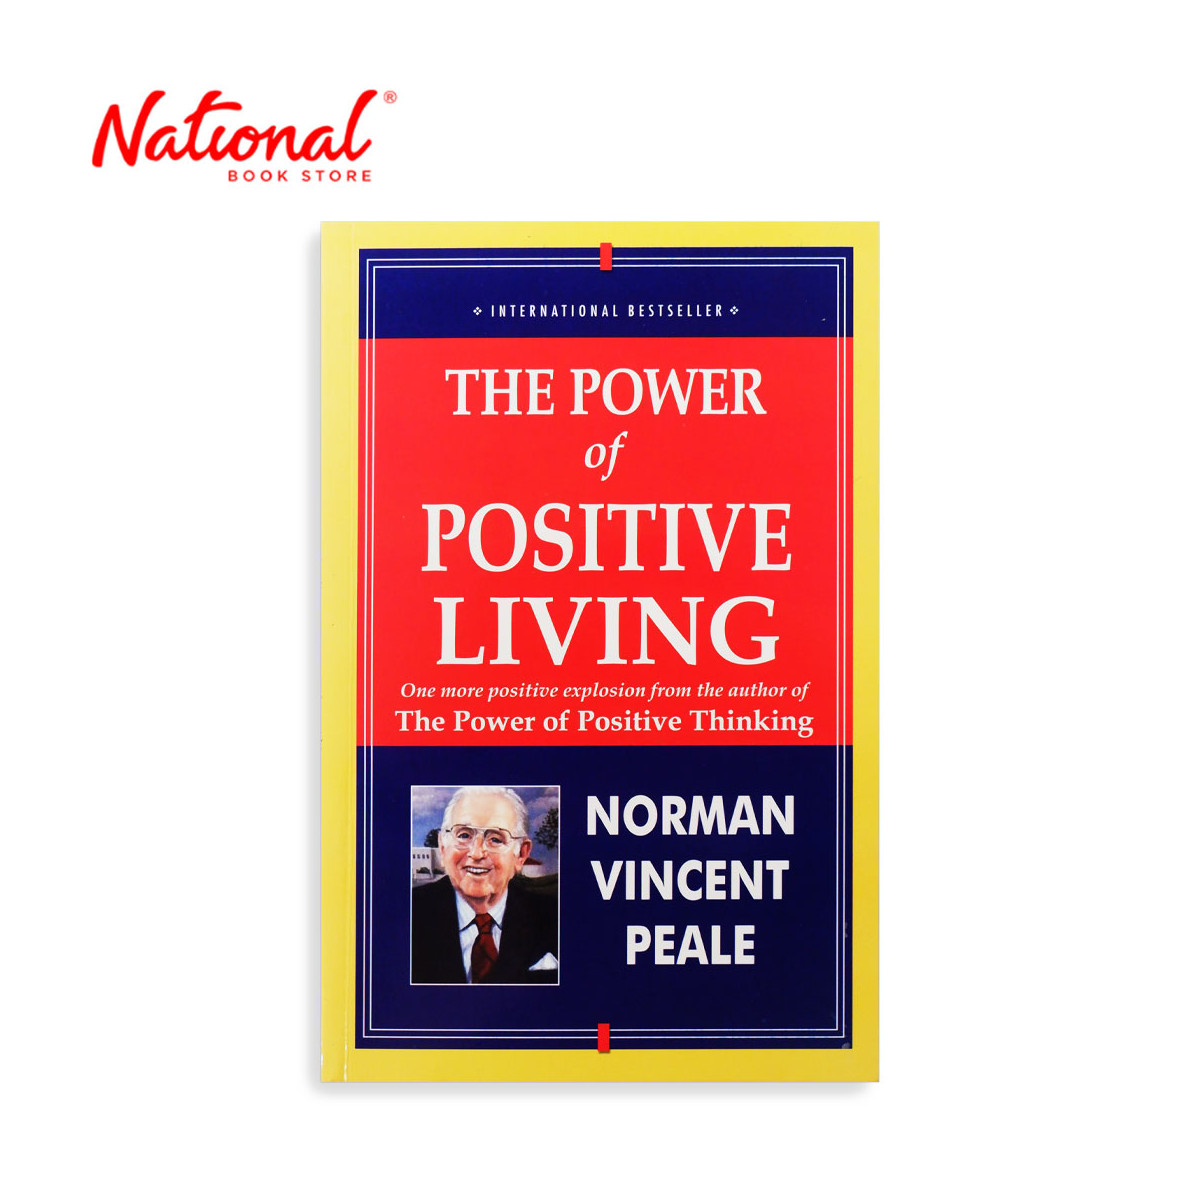 The Power of Positive Living by Norman Vincent Peale Trade Paperback - Self-Help Books